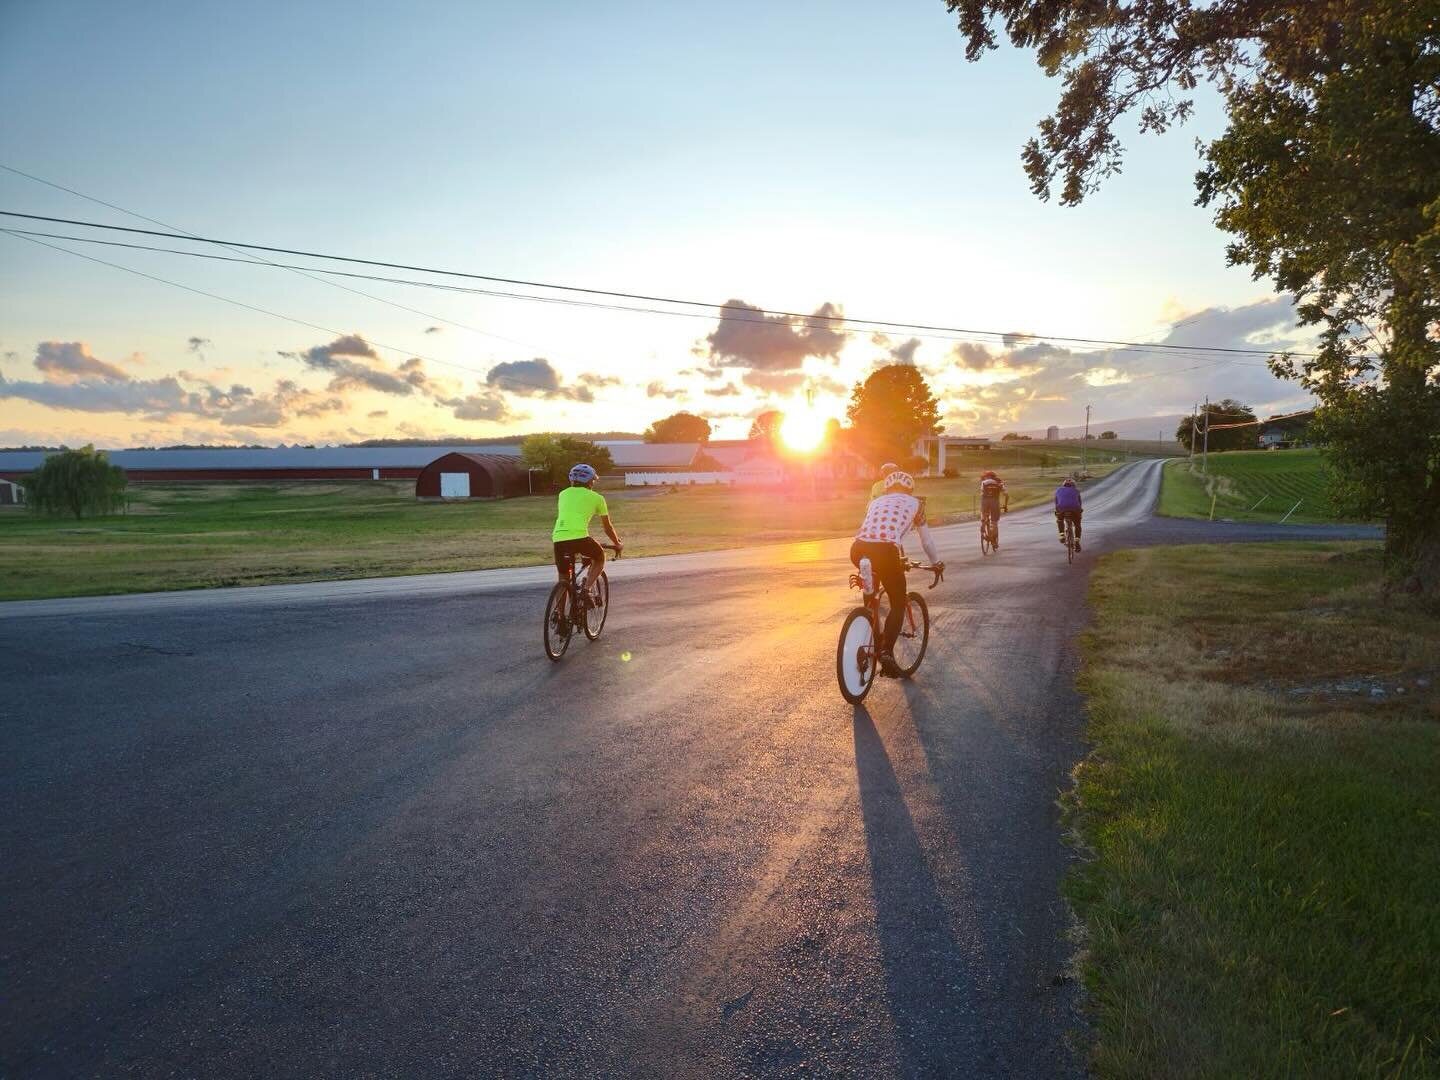 The Thursday ride returns! Join us this Thursday at 6:15 on the Rocktown deck for the first ride of the season. 

This will be a 25-30 mile road/gravel ride rolling from the shop every Thursday evening. For more info stop by the shop or check out the